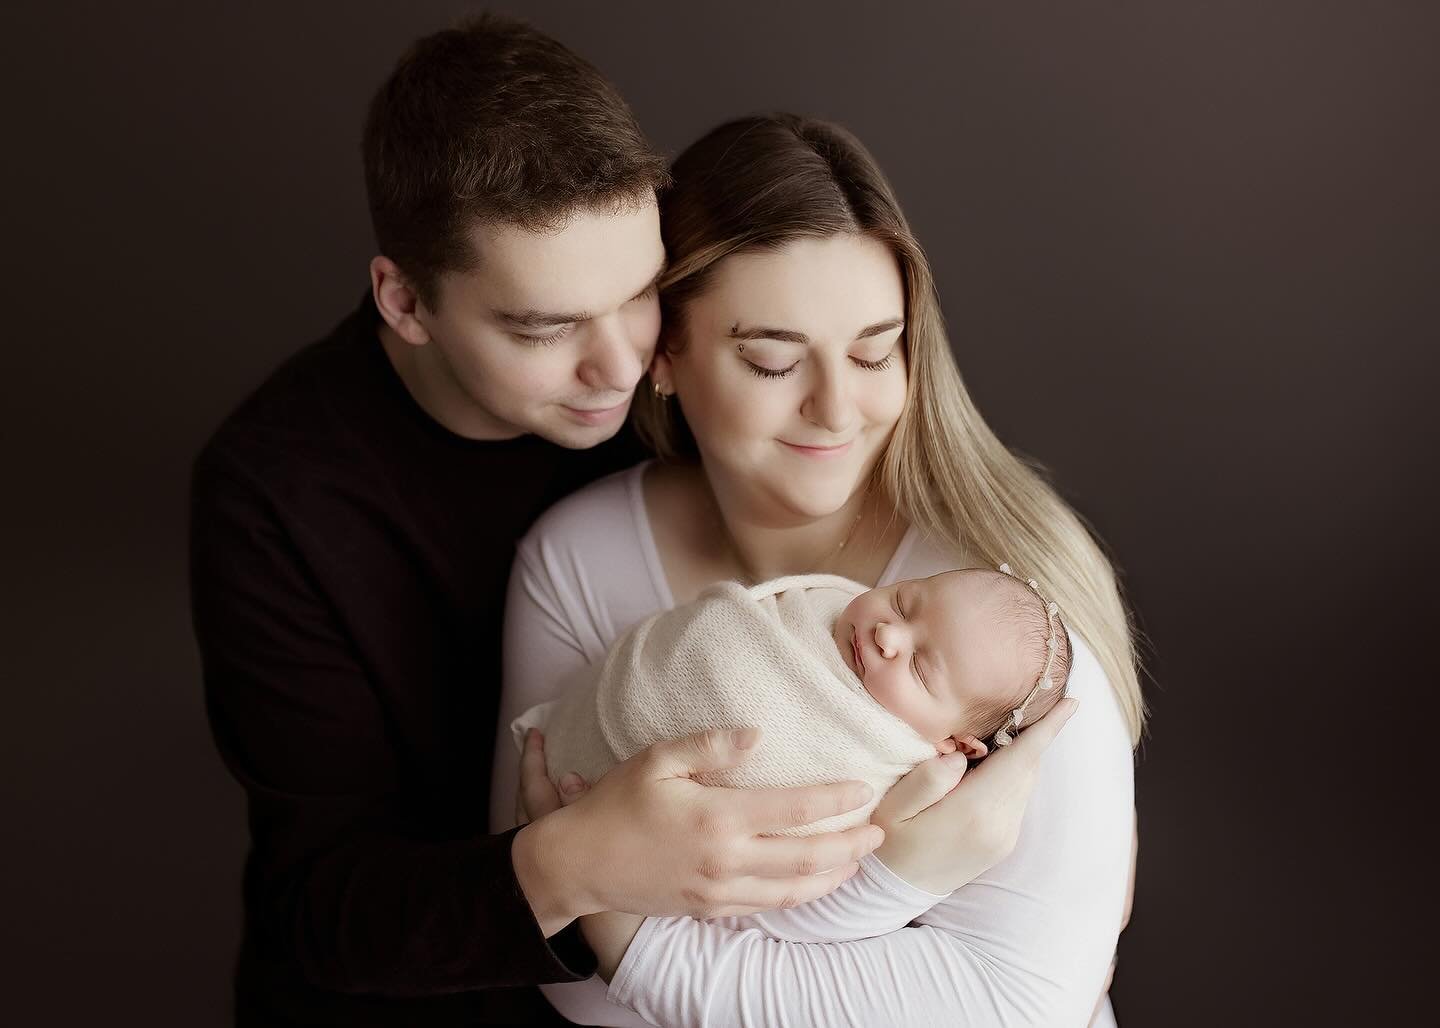 📸 Are you searching for a newborn photographer but unsure what sets us apart beyond pricing? Here&rsquo;s why choosing me, Kelsie Kelly, is your best decision:

1. Experience: With over a decade capturing newborn moments and training from industry l